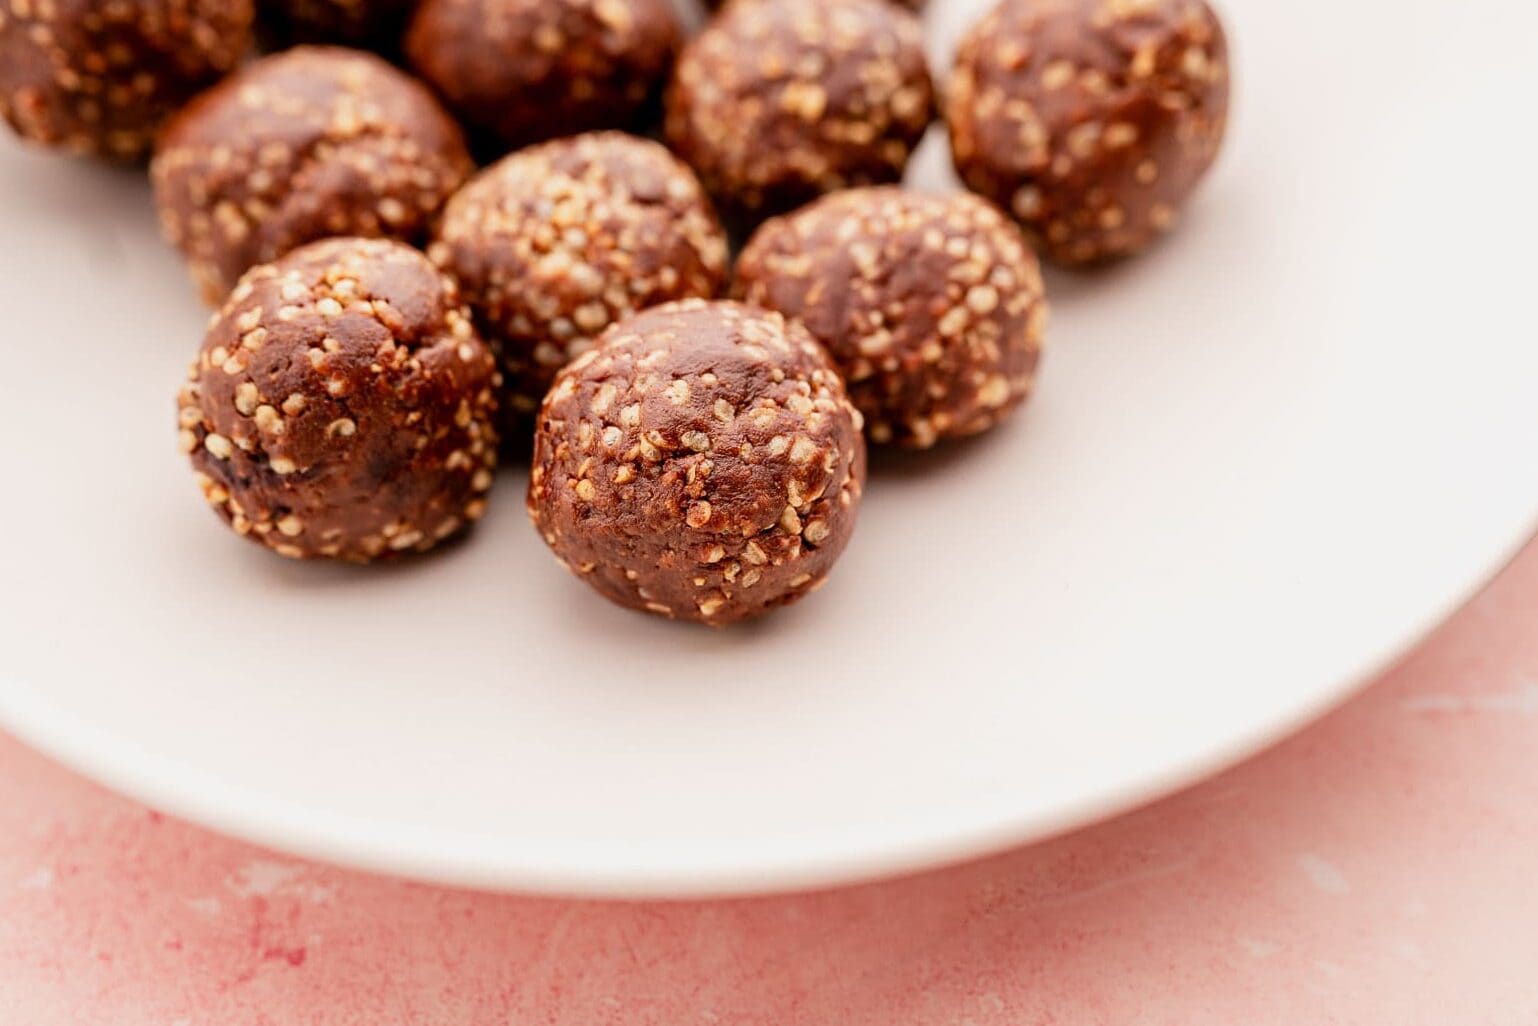 A white plate containing several round, chocolate-covered amaranth seed balls on a light pink surface.